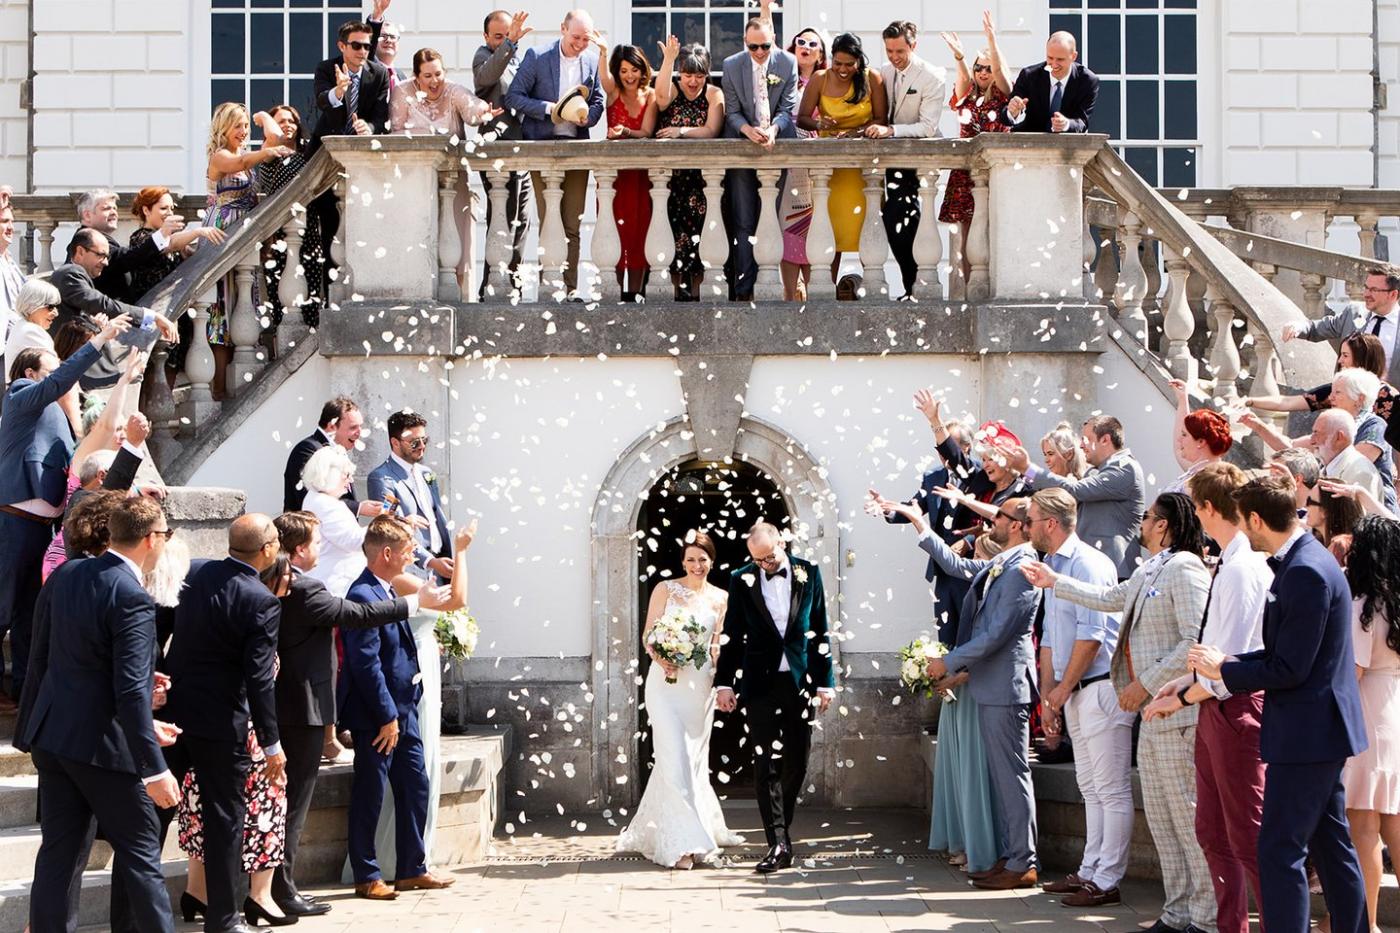 An image showing 'Confetti Moment'